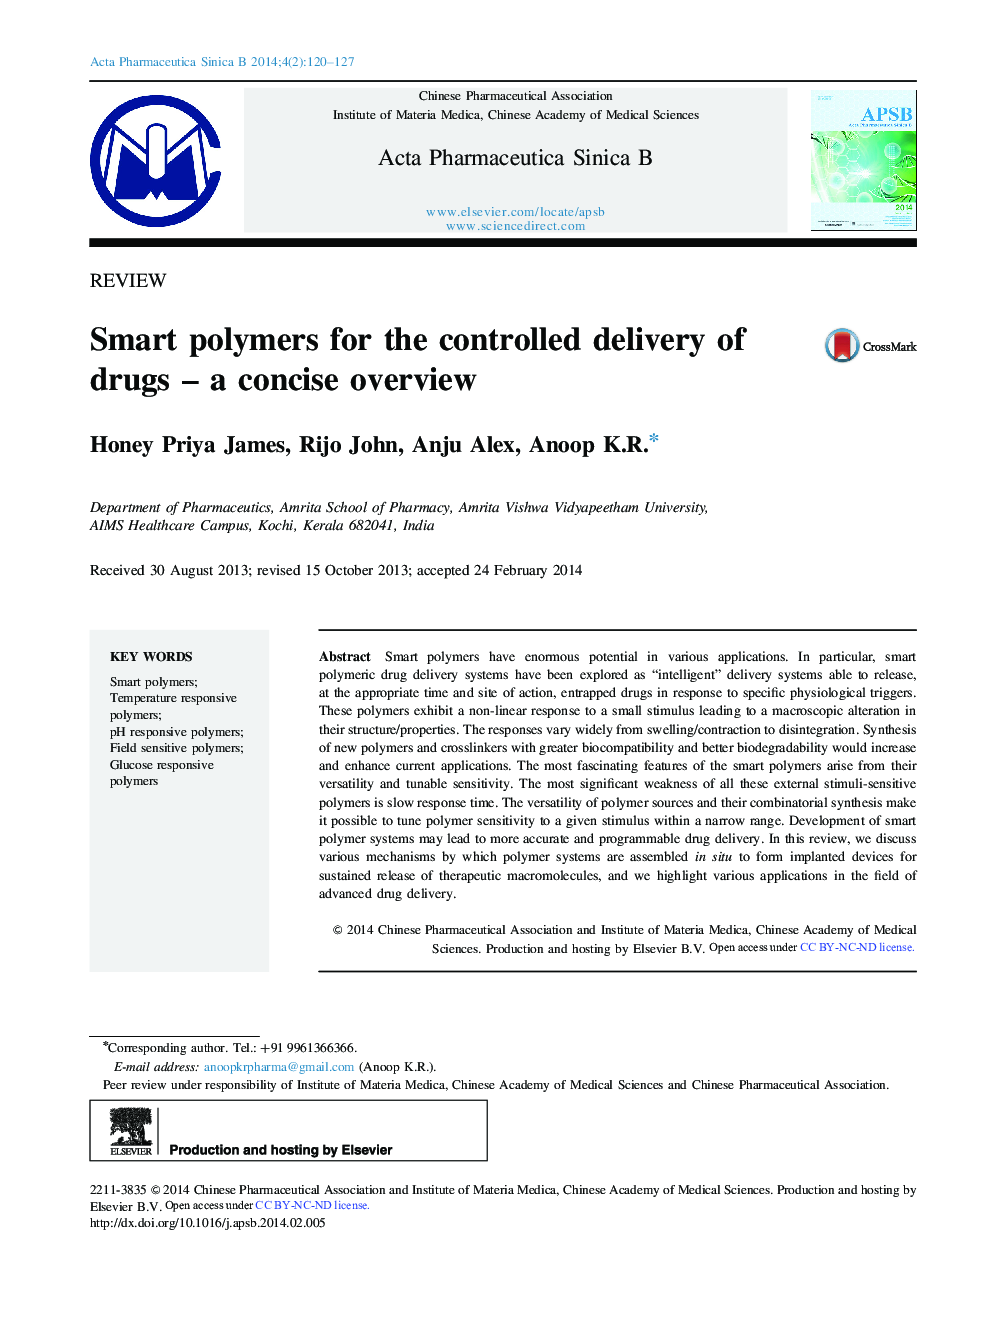 Smart polymers for the controlled delivery of drugs – a concise overview 